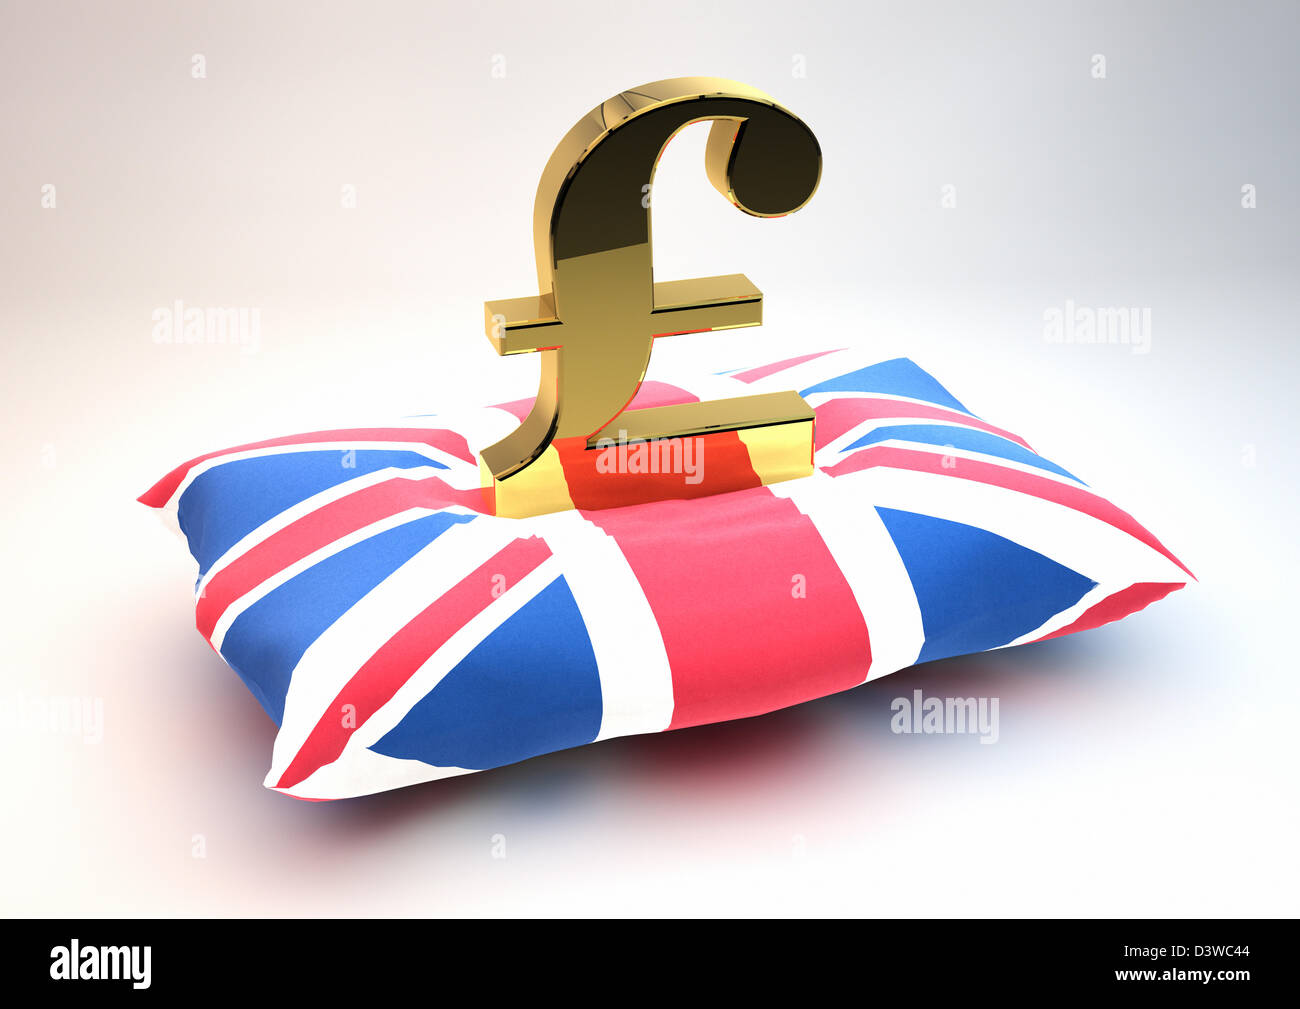 Solid gold British Pound symbol sitting on a Union Jack Flag patterned cushion - Protecting falling currency / caring concept Stock Photo